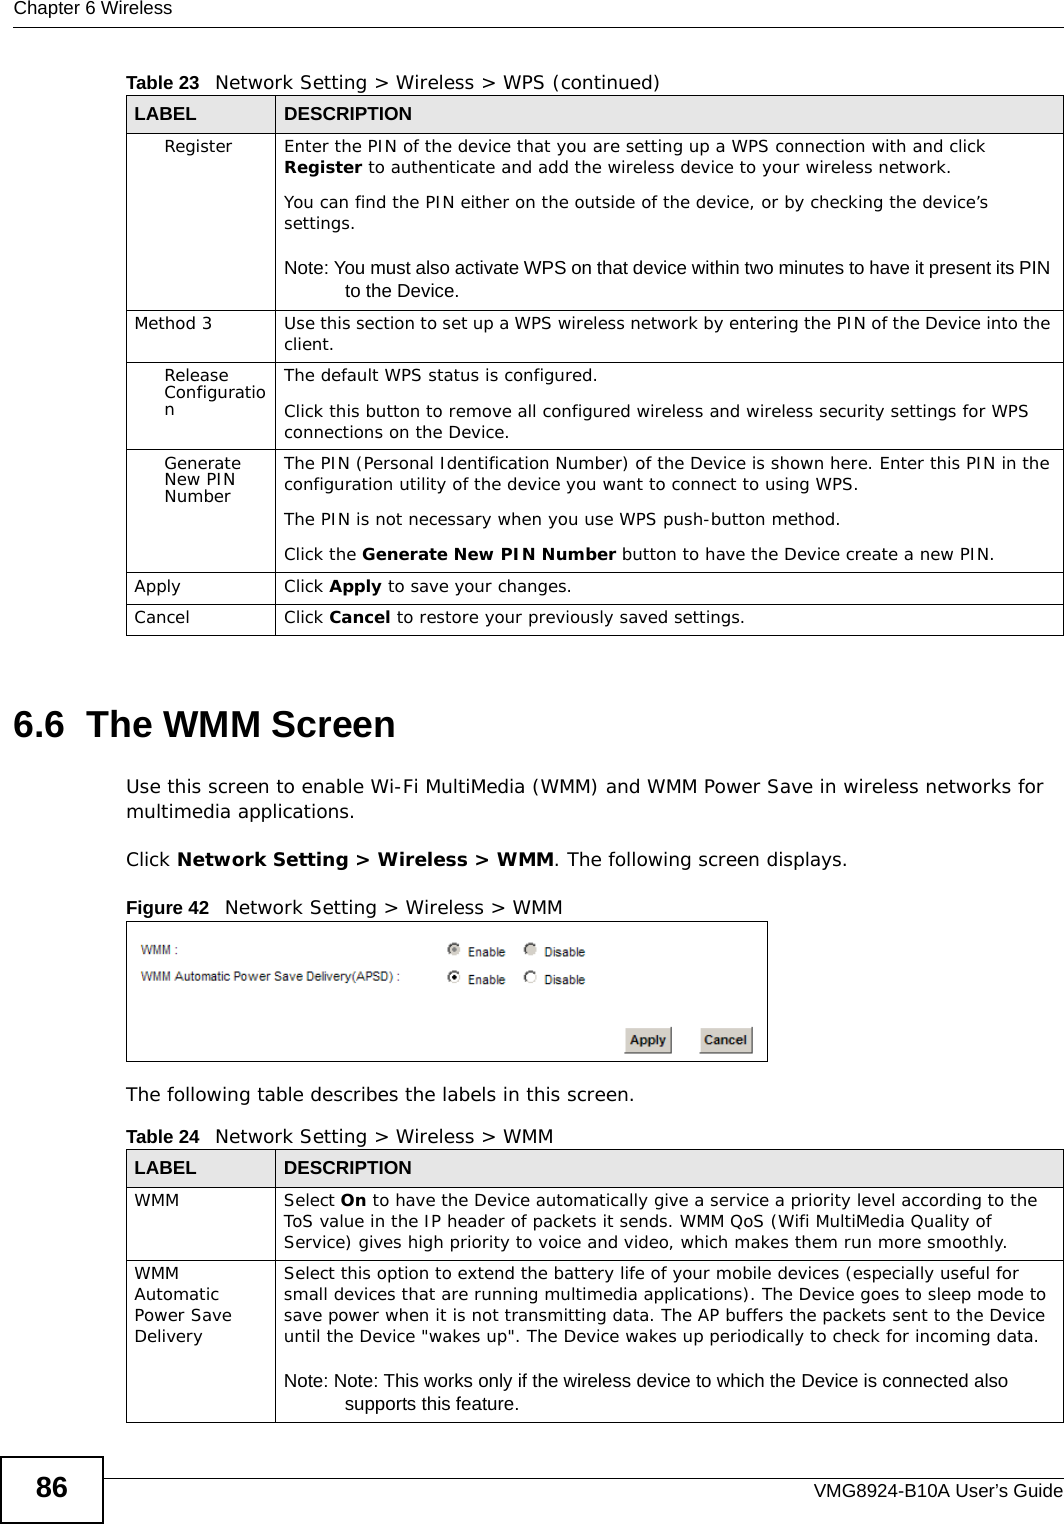 Chapter 6 WirelessVMG8924-B10A User’s Guide866.6  The WMM ScreenUse this screen to enable Wi-Fi MultiMedia (WMM) and WMM Power Save in wireless networks for multimedia applications.Click Network Setting &gt; Wireless &gt; WMM. The following screen displays.Figure 42   Network Setting &gt; Wireless &gt; WMMThe following table describes the labels in this screen.Register Enter the PIN of the device that you are setting up a WPS connection with and click Register to authenticate and add the wireless device to your wireless network.You can find the PIN either on the outside of the device, or by checking the device’s settings.Note: You must also activate WPS on that device within two minutes to have it present its PIN to the Device.Method 3 Use this section to set up a WPS wireless network by entering the PIN of the Device into the client.Release ConfigurationThe default WPS status is configured.Click this button to remove all configured wireless and wireless security settings for WPS connections on the Device.Generate New PIN NumberThe PIN (Personal Identification Number) of the Device is shown here. Enter this PIN in the configuration utility of the device you want to connect to using WPS.The PIN is not necessary when you use WPS push-button method.Click the Generate New PIN Number button to have the Device create a new PIN. Apply Click Apply to save your changes.Cancel Click Cancel to restore your previously saved settings.Table 23   Network Setting &gt; Wireless &gt; WPS (continued)LABEL DESCRIPTIONTable 24   Network Setting &gt; Wireless &gt; WMMLABEL DESCRIPTIONWMM Select On to have the Device automatically give a service a priority level according to the ToS value in the IP header of packets it sends. WMM QoS (Wifi MultiMedia Quality of Service) gives high priority to voice and video, which makes them run more smoothly.WMM Automatic Power Save DeliverySelect this option to extend the battery life of your mobile devices (especially useful for small devices that are running multimedia applications). The Device goes to sleep mode to save power when it is not transmitting data. The AP buffers the packets sent to the Device until the Device &quot;wakes up&quot;. The Device wakes up periodically to check for incoming data.Note: Note: This works only if the wireless device to which the Device is connected also supports this feature.